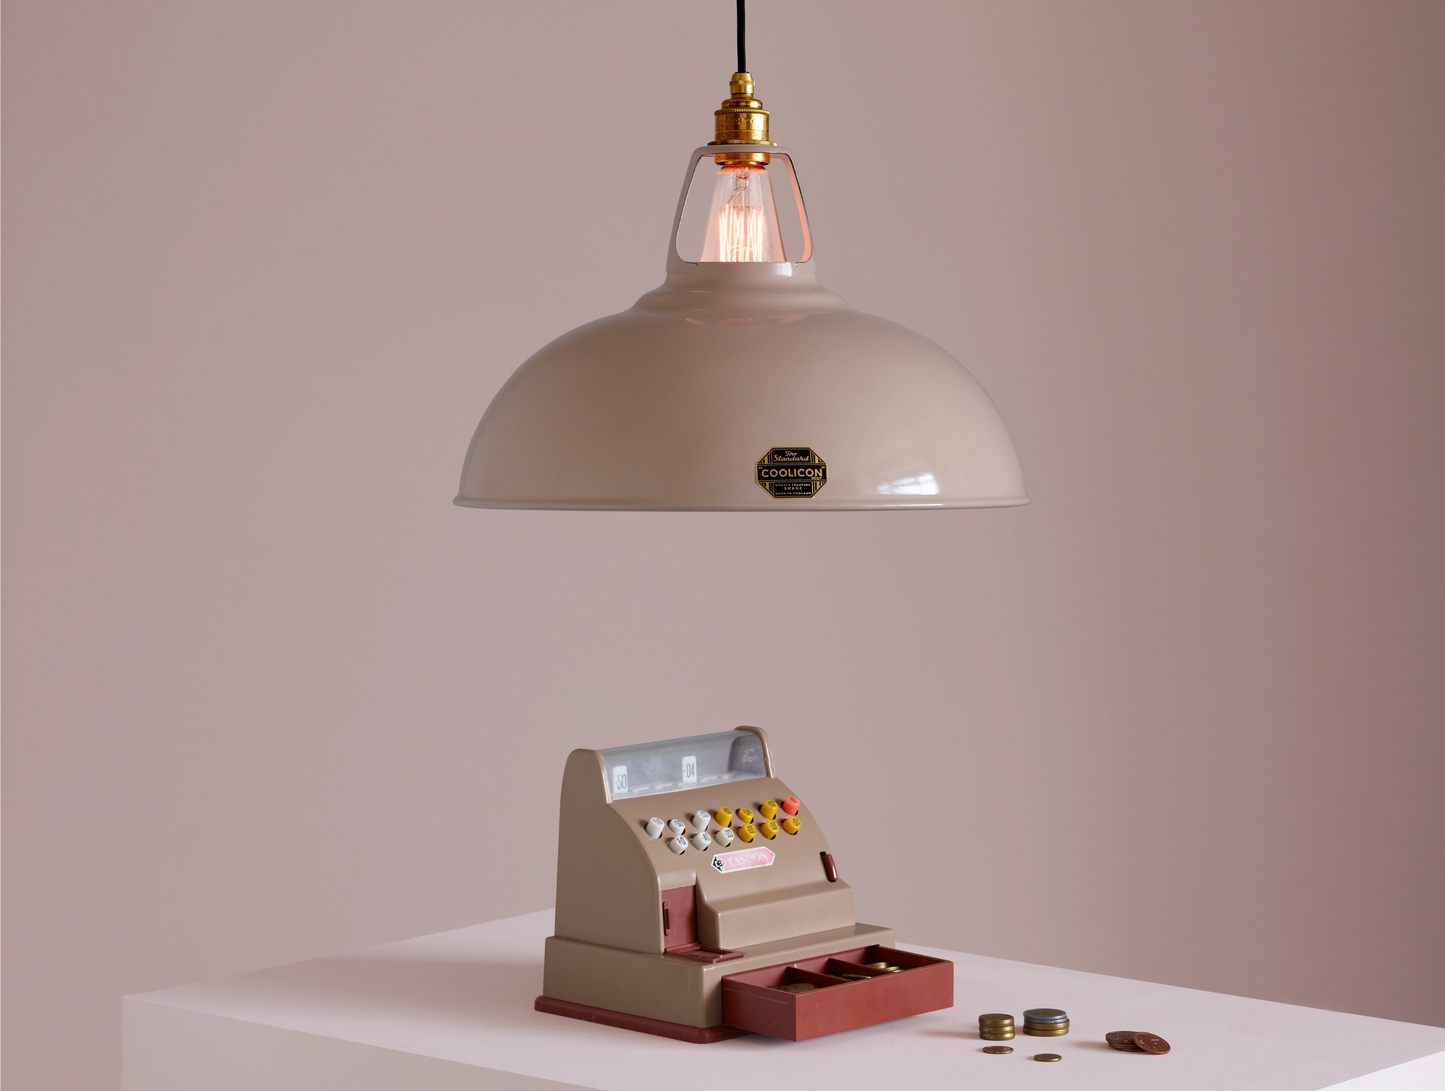 A Large Coolicon Latte Brown lampshade with a Porcelain pendant set hanging above a plinth with a vintage-looking light brown toy cash register and coins